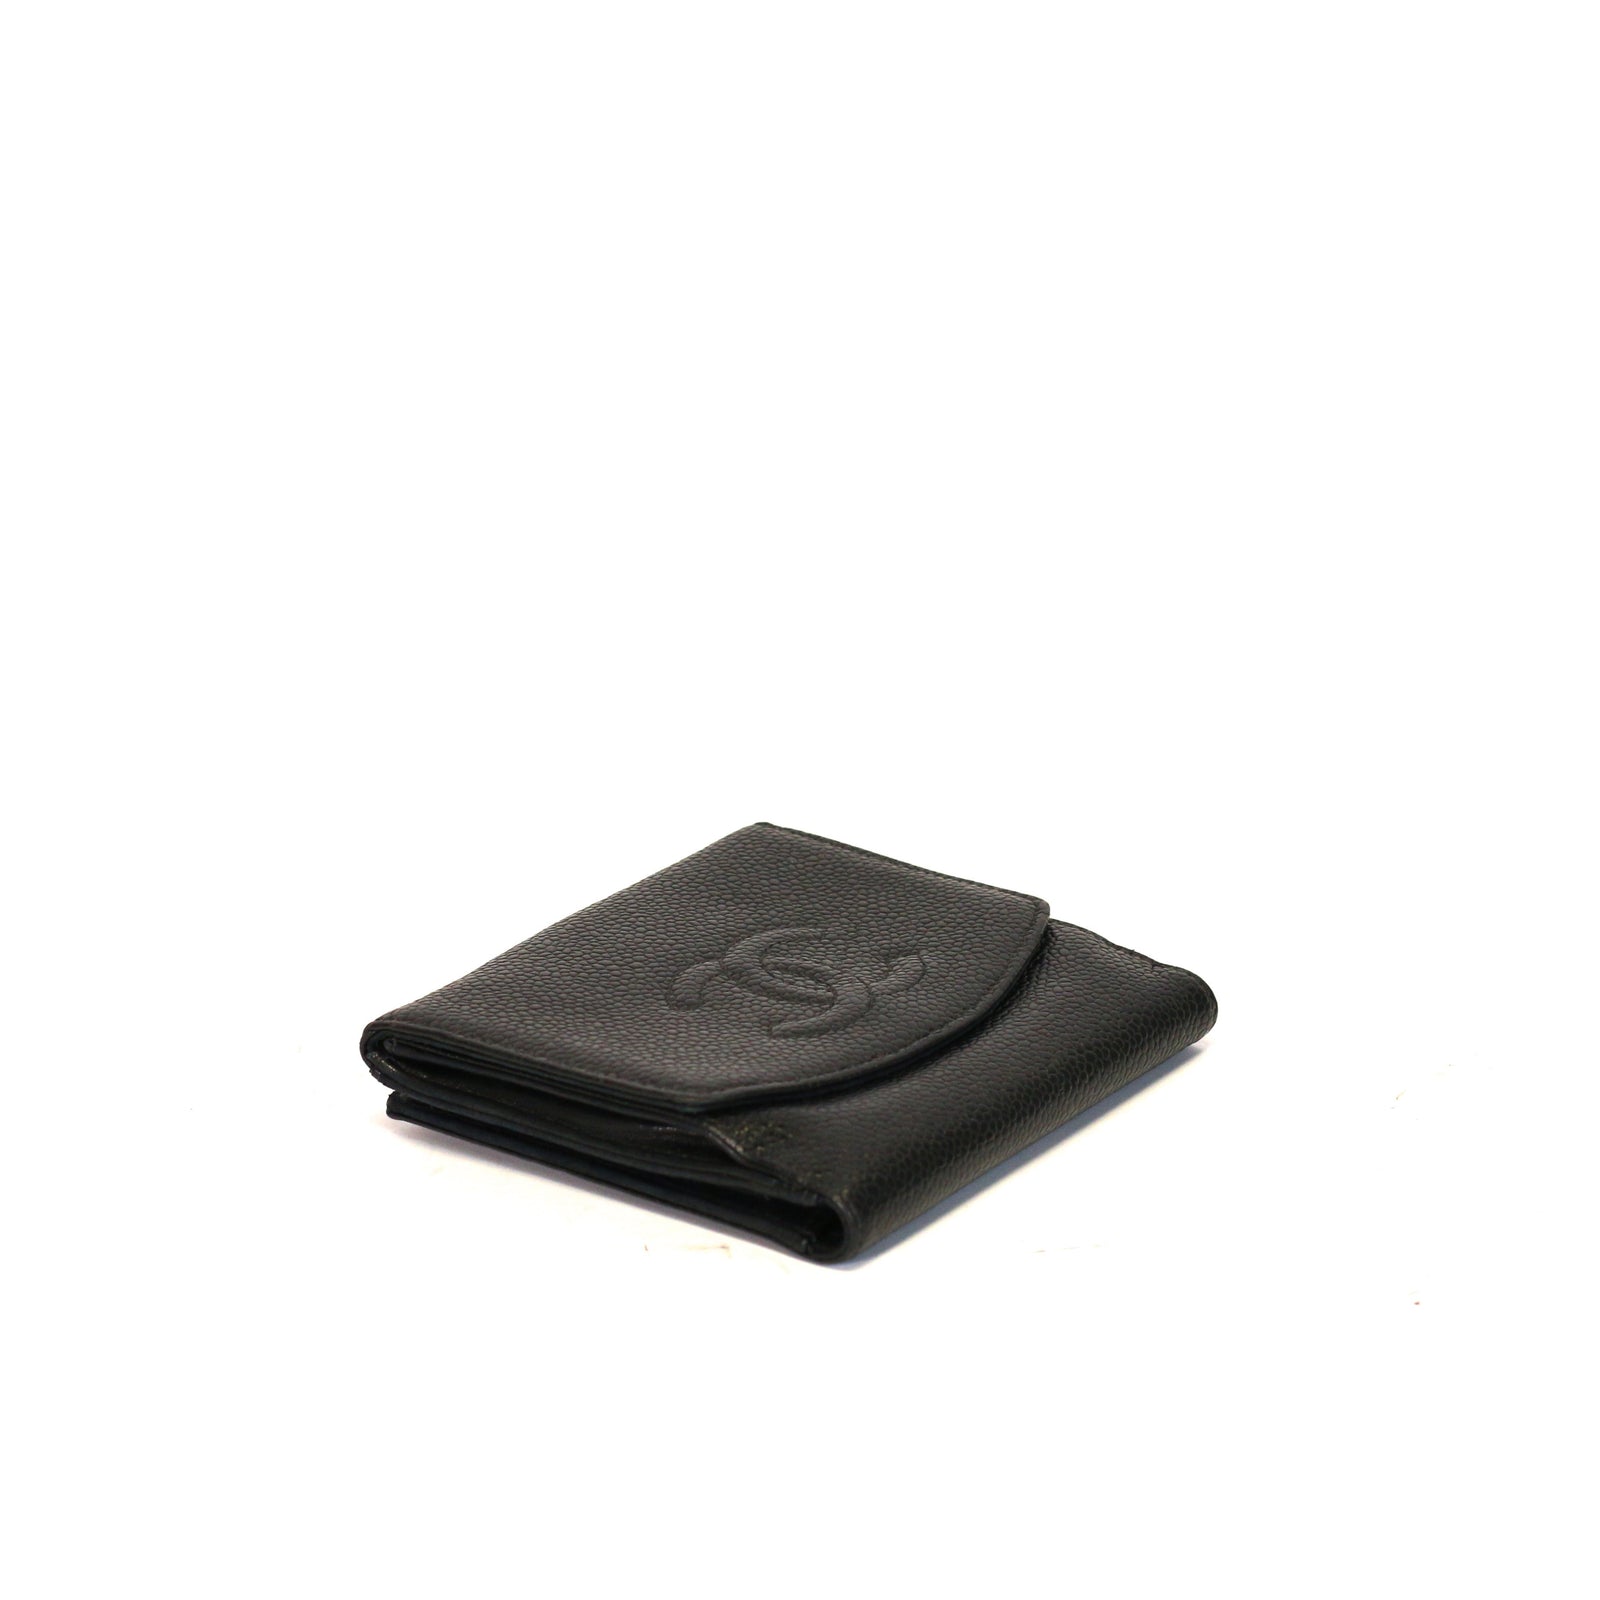 Caviar Timeless CC Compact French Wallet Black